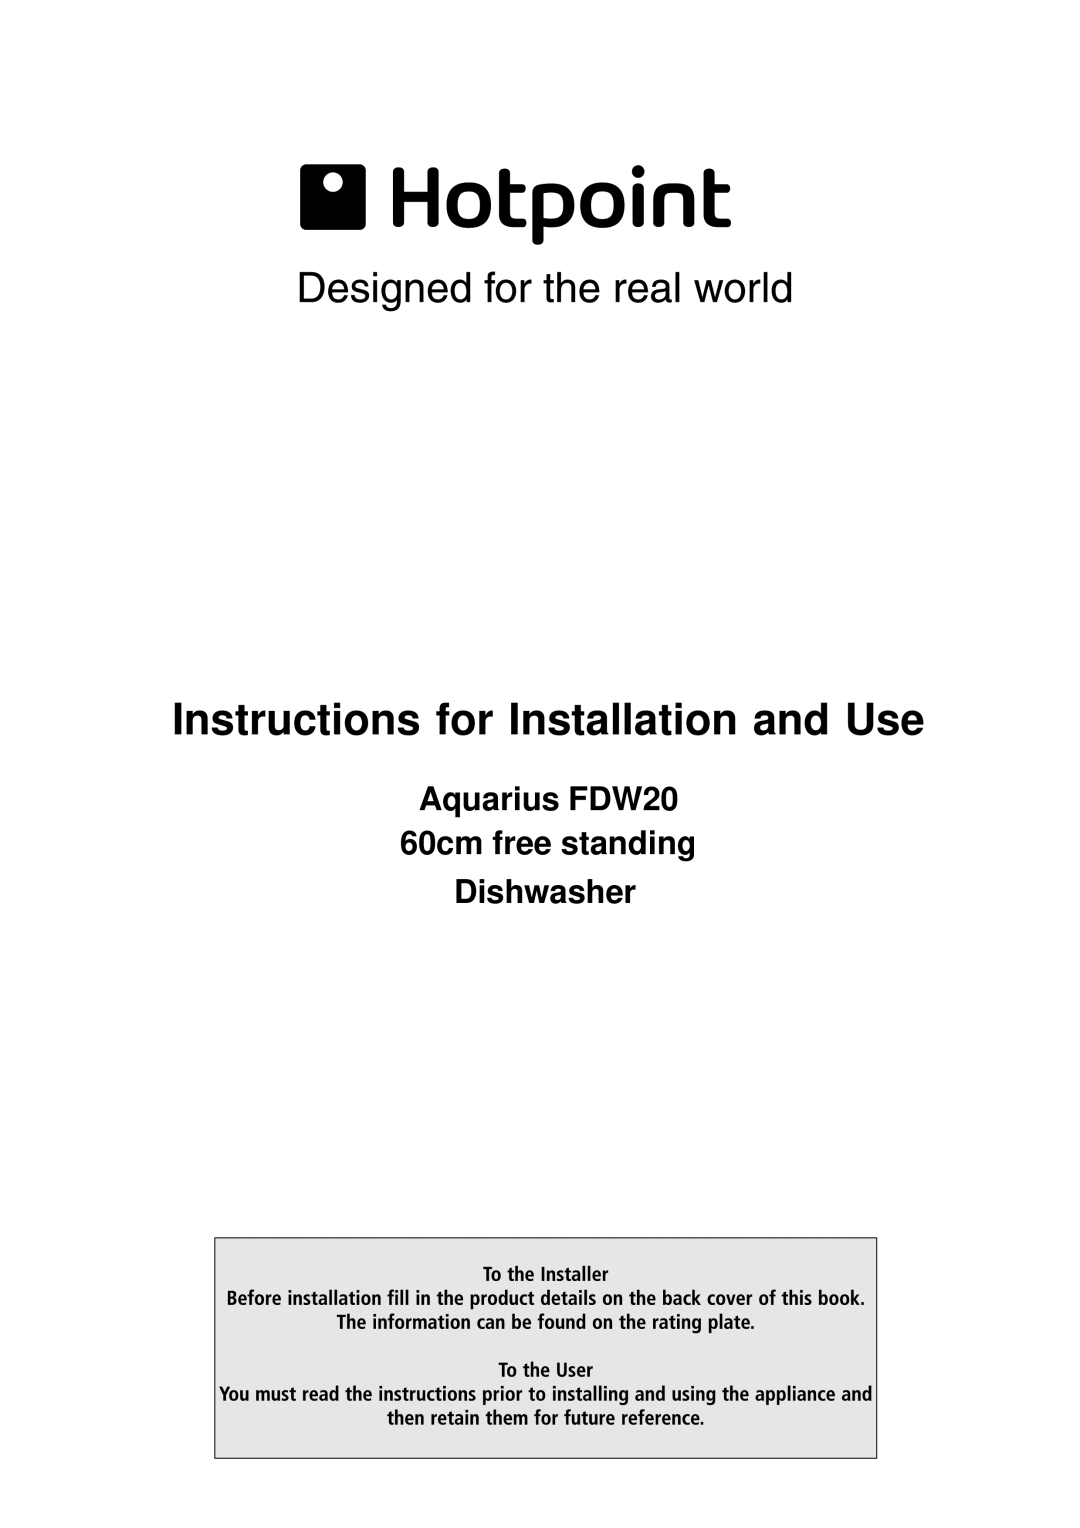 Hotpoint manual Instructions for Installation and Use, Aquarius FDW20 60cm free standing Dishwasher 